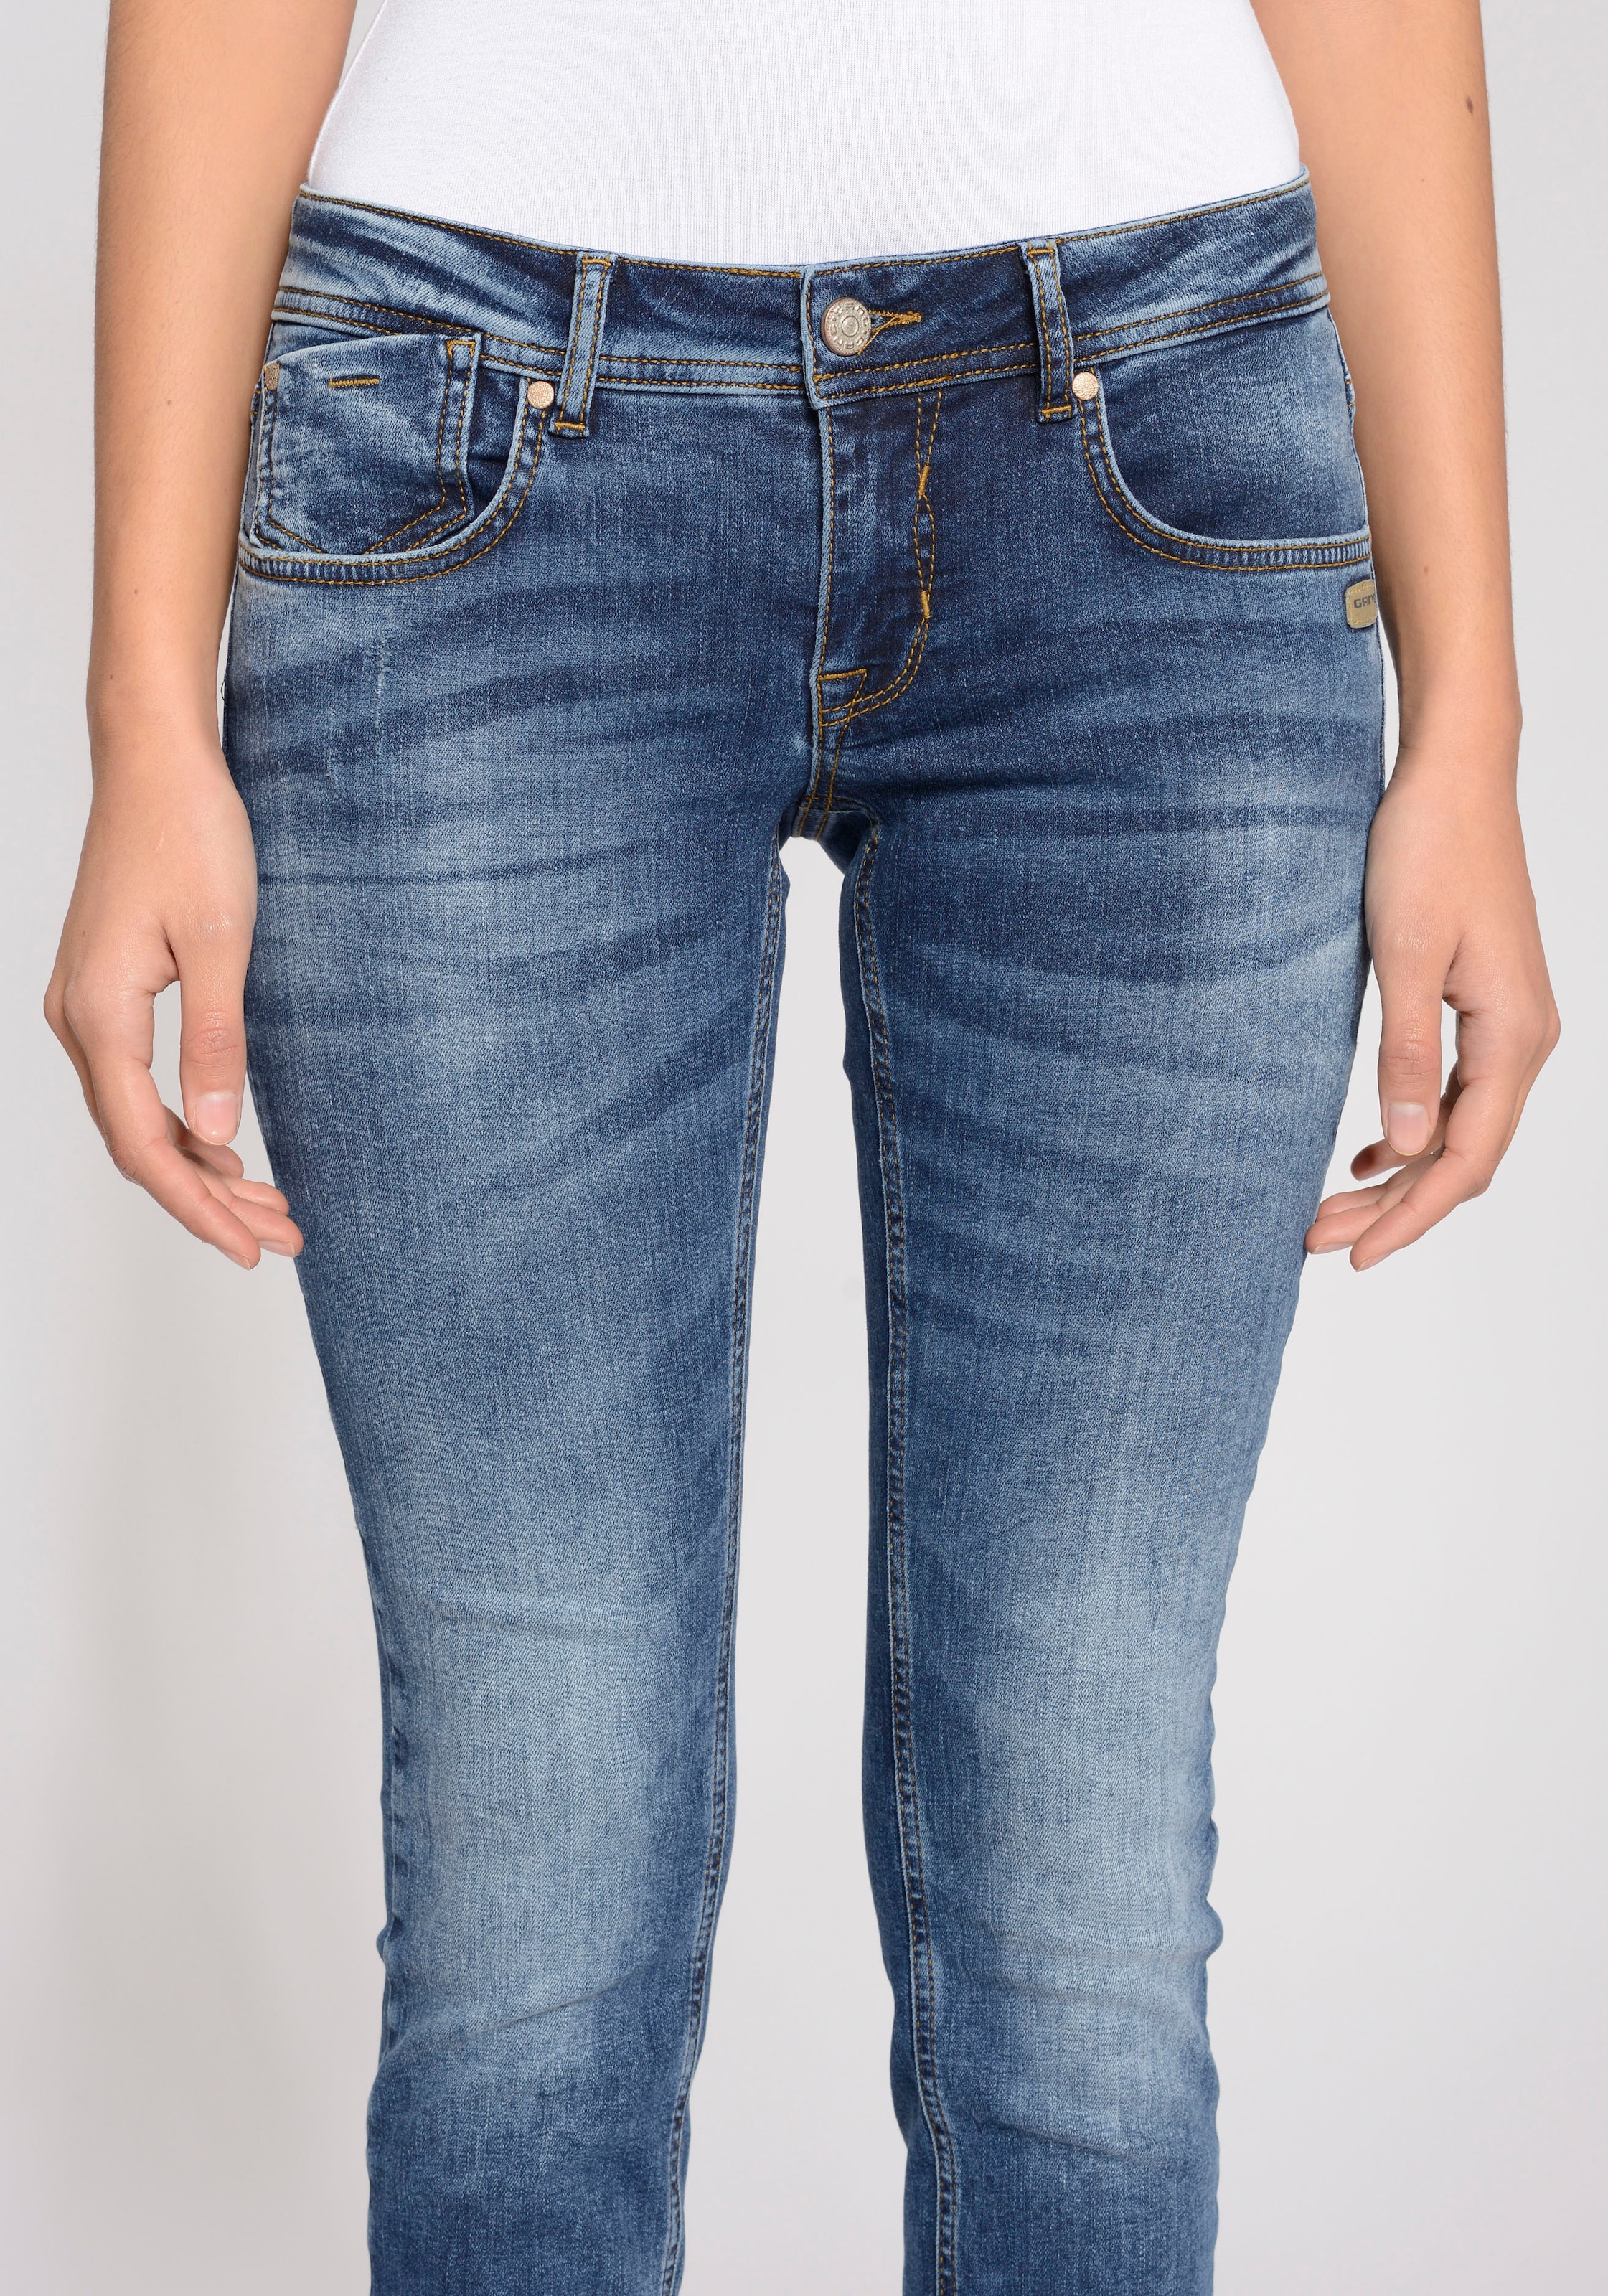 ♕ GANG »94 bei Skinny-fit-Jeans Cropped« Faye